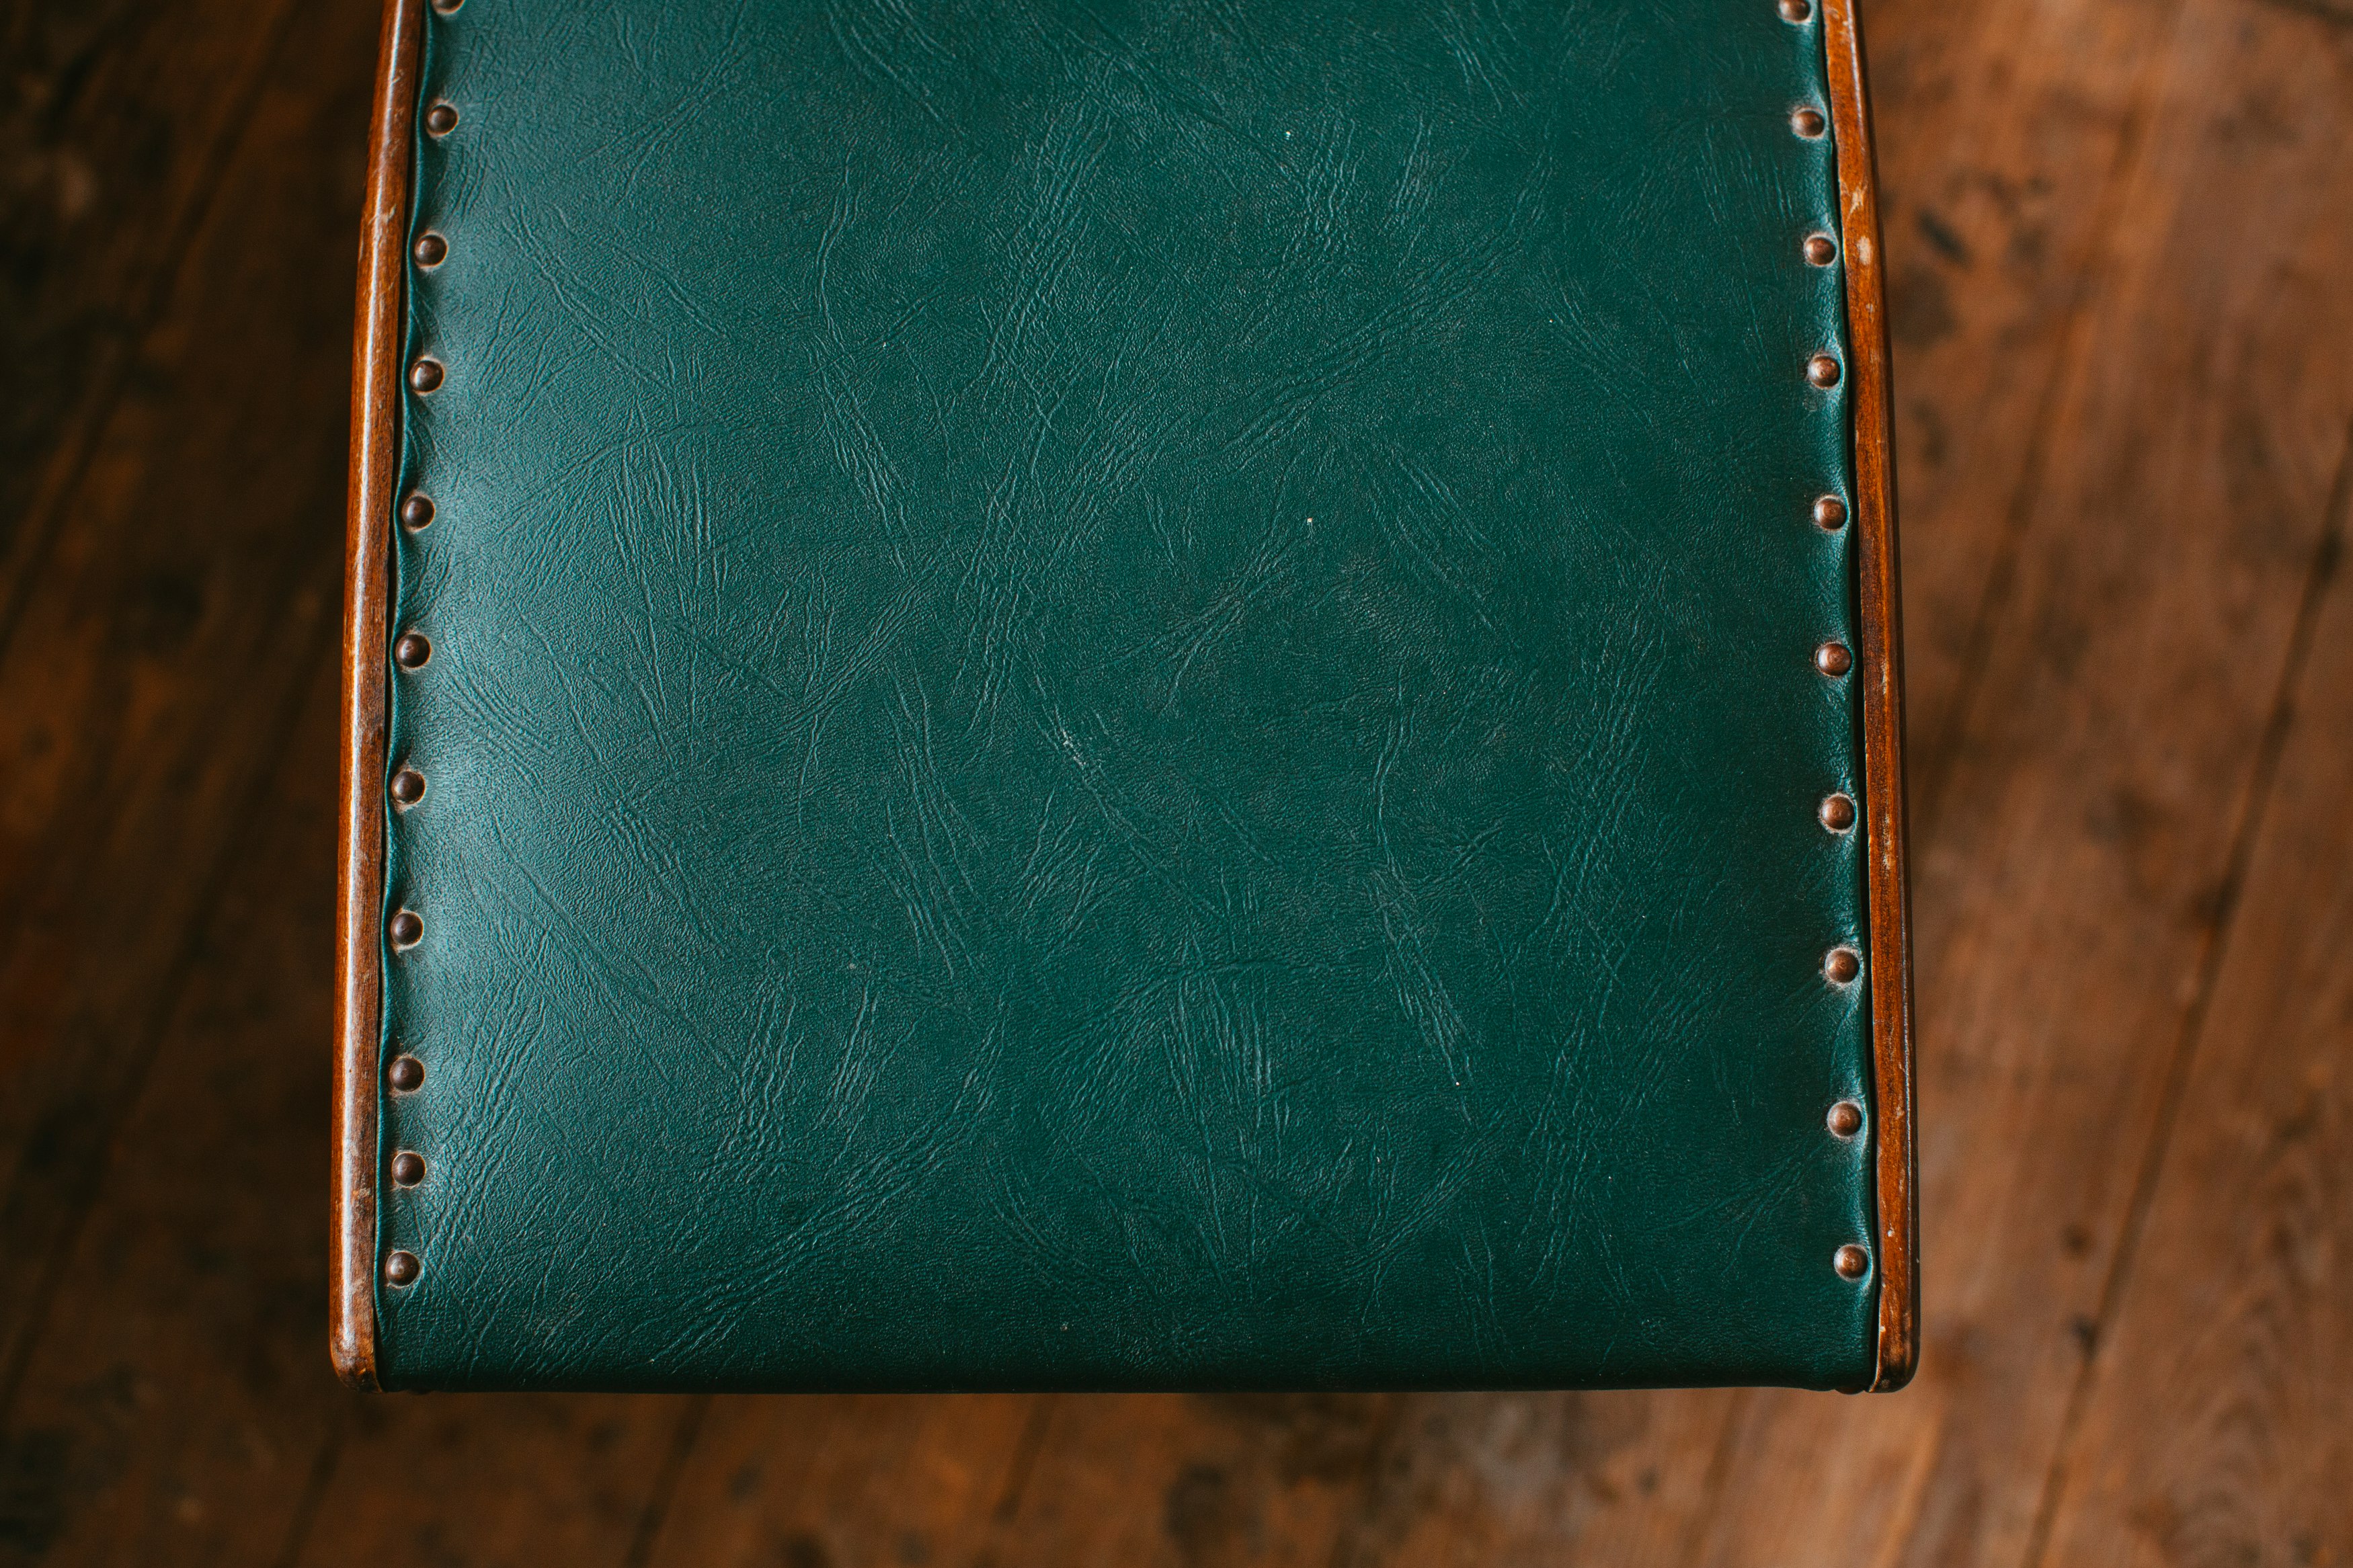 green leather wallet on brown wooden table